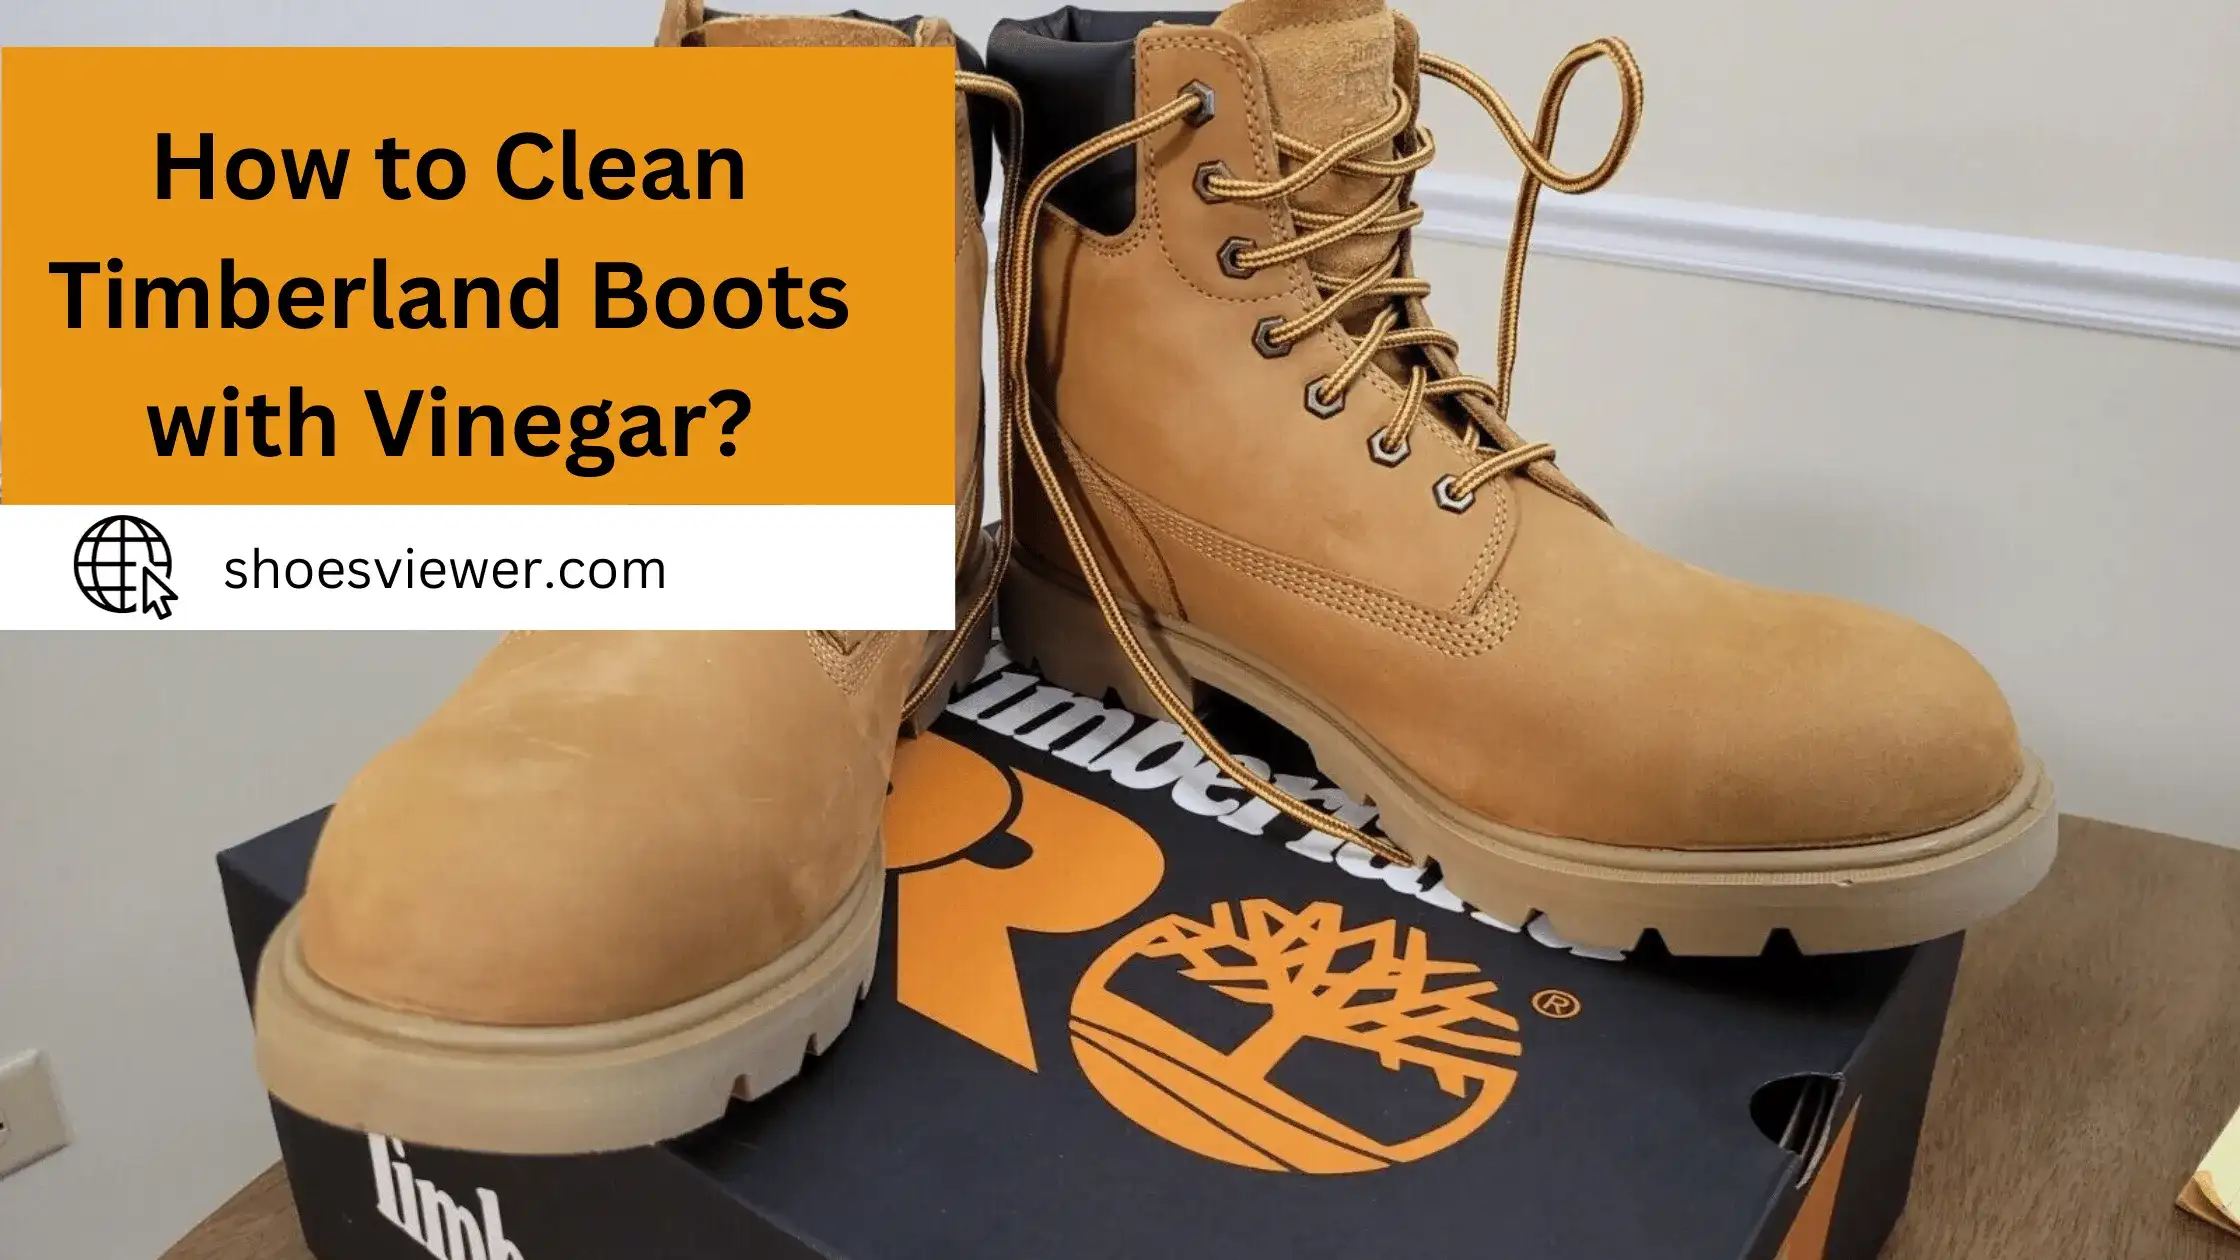 How To Clean Timberland Boots With Vinegar? Complete Guide